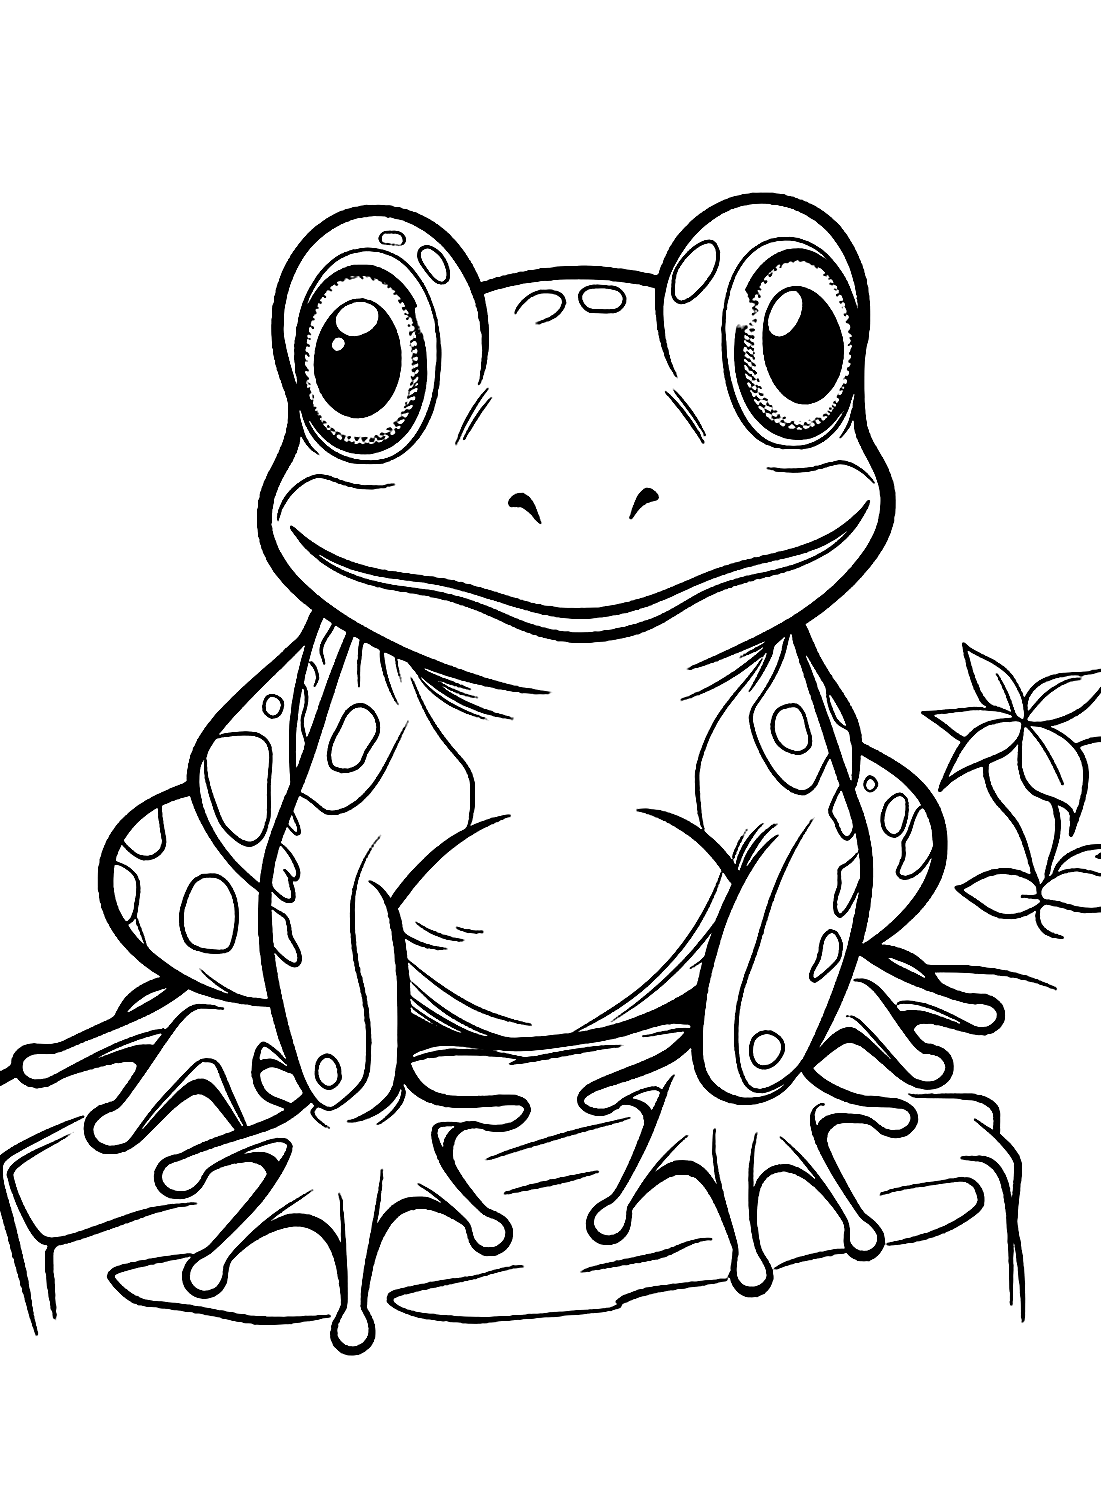 Cute frog coloring pages